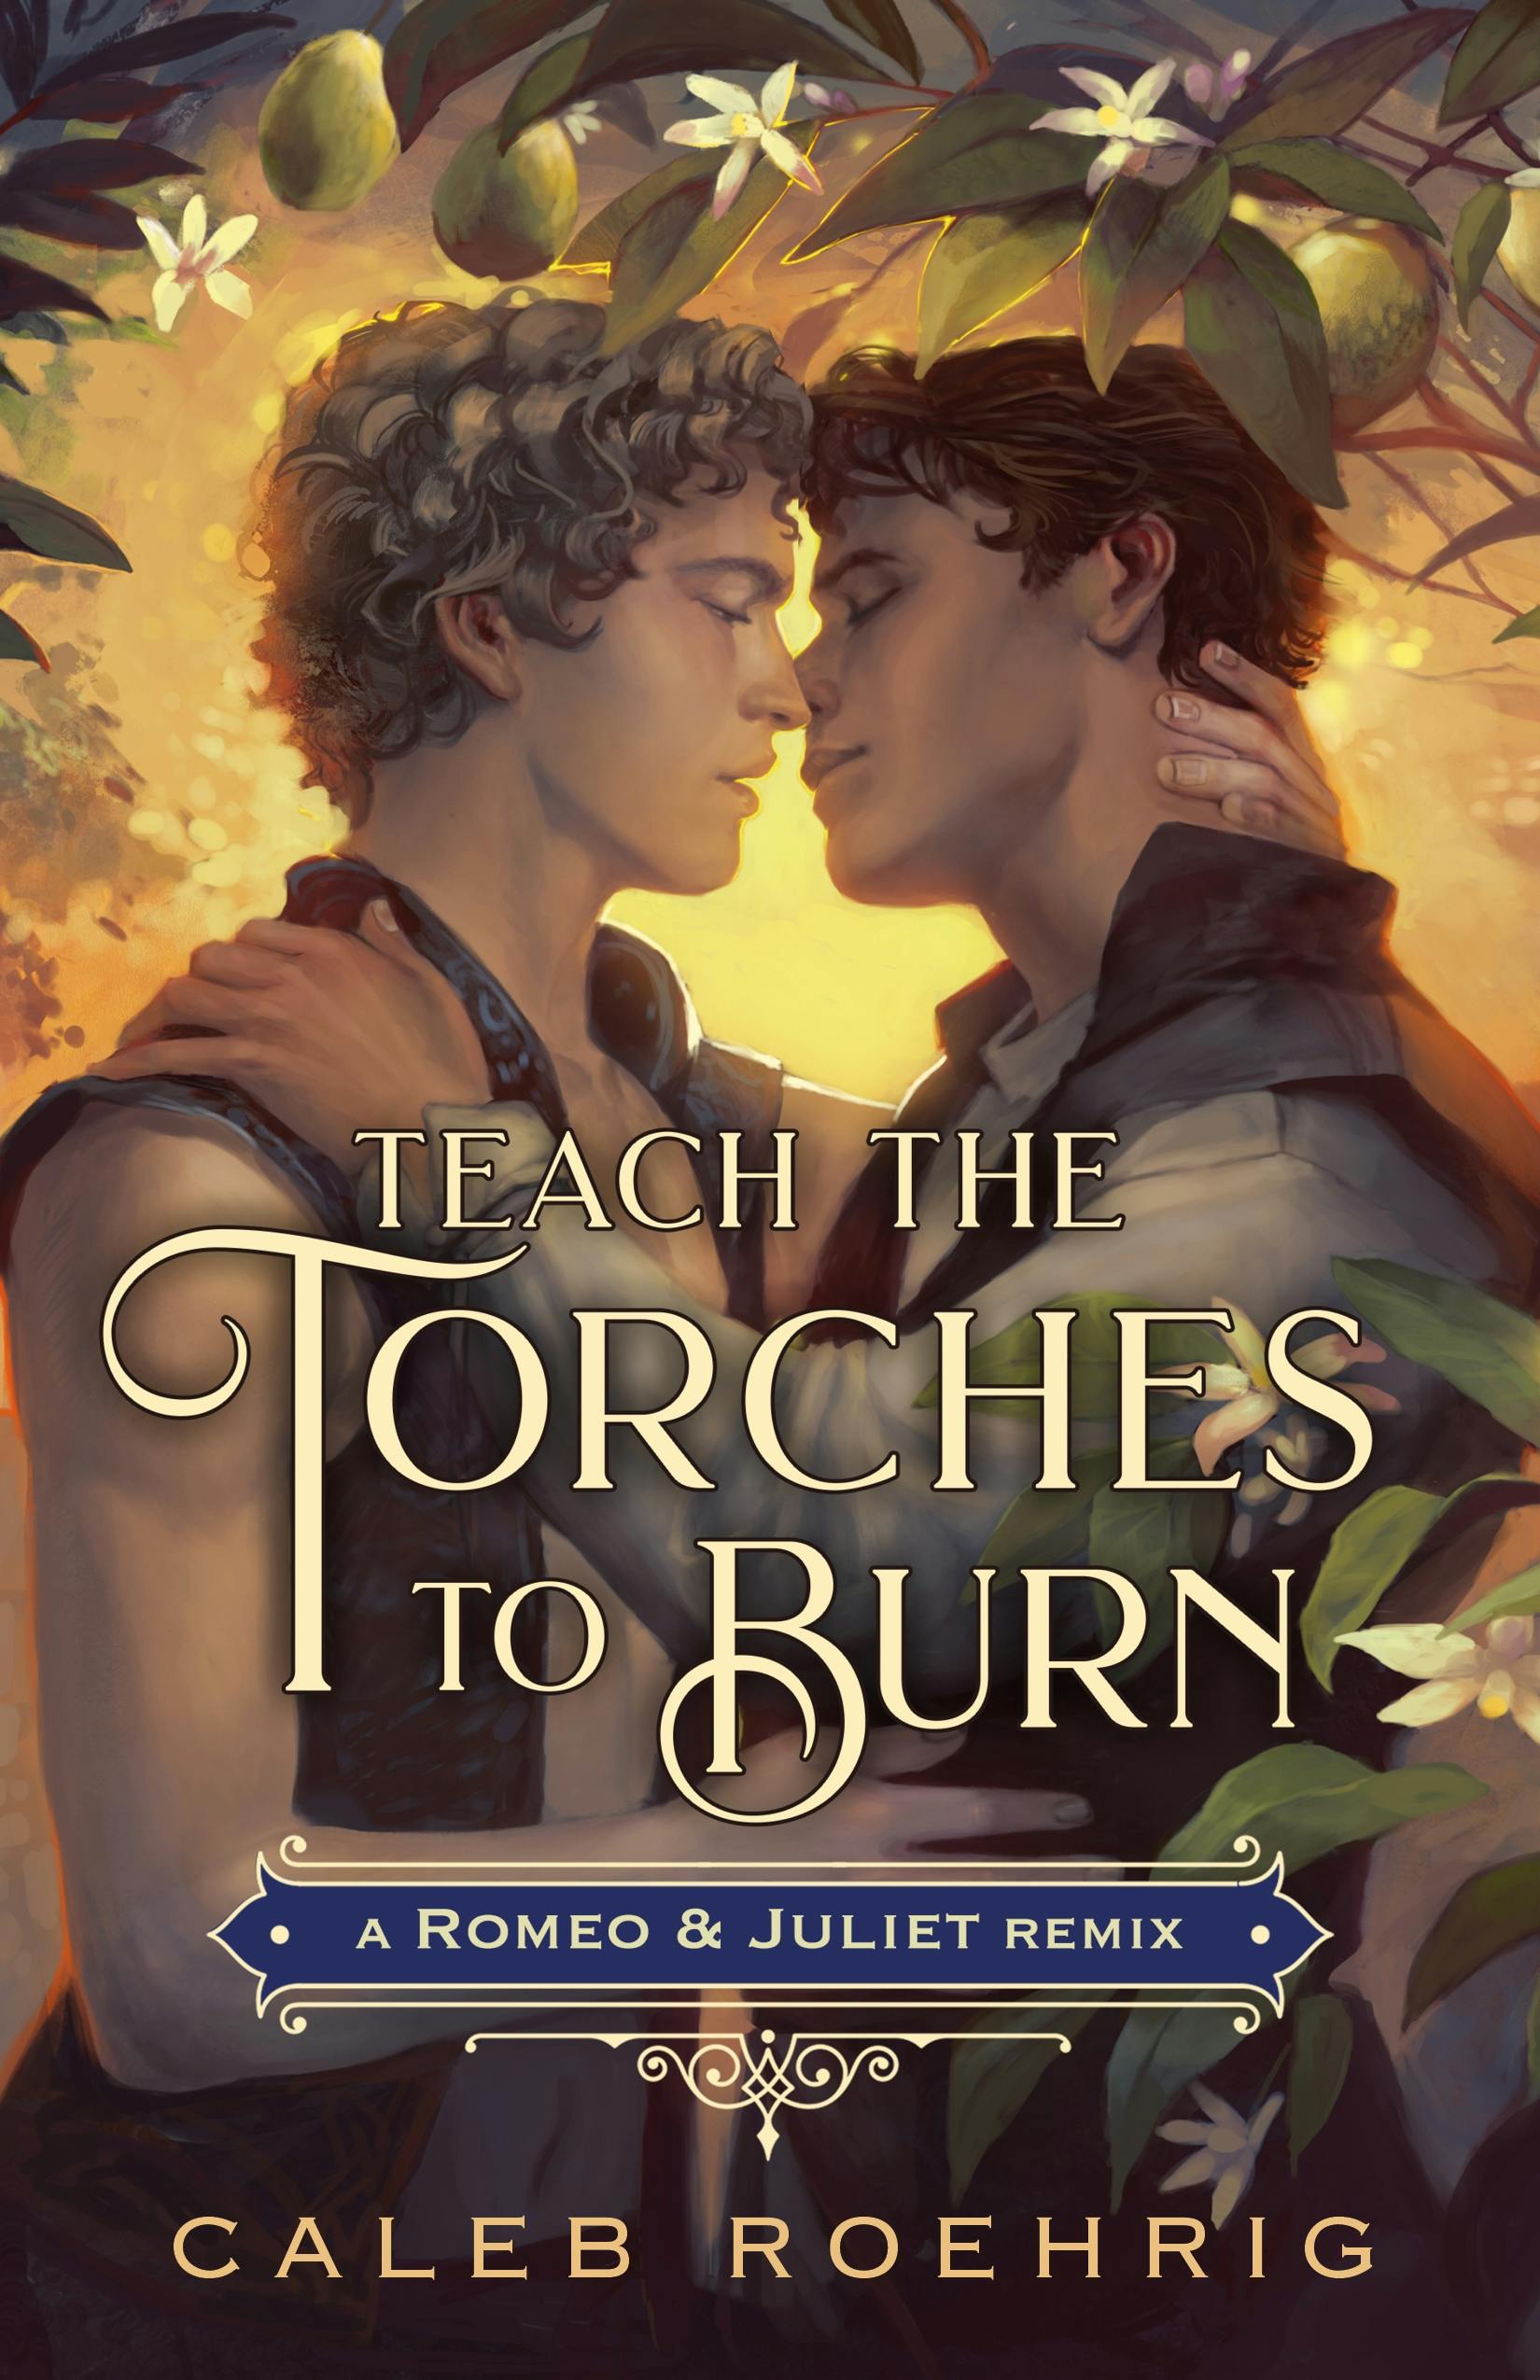 Teach the Torches to Burn A Romeo and Juliet Remix pic